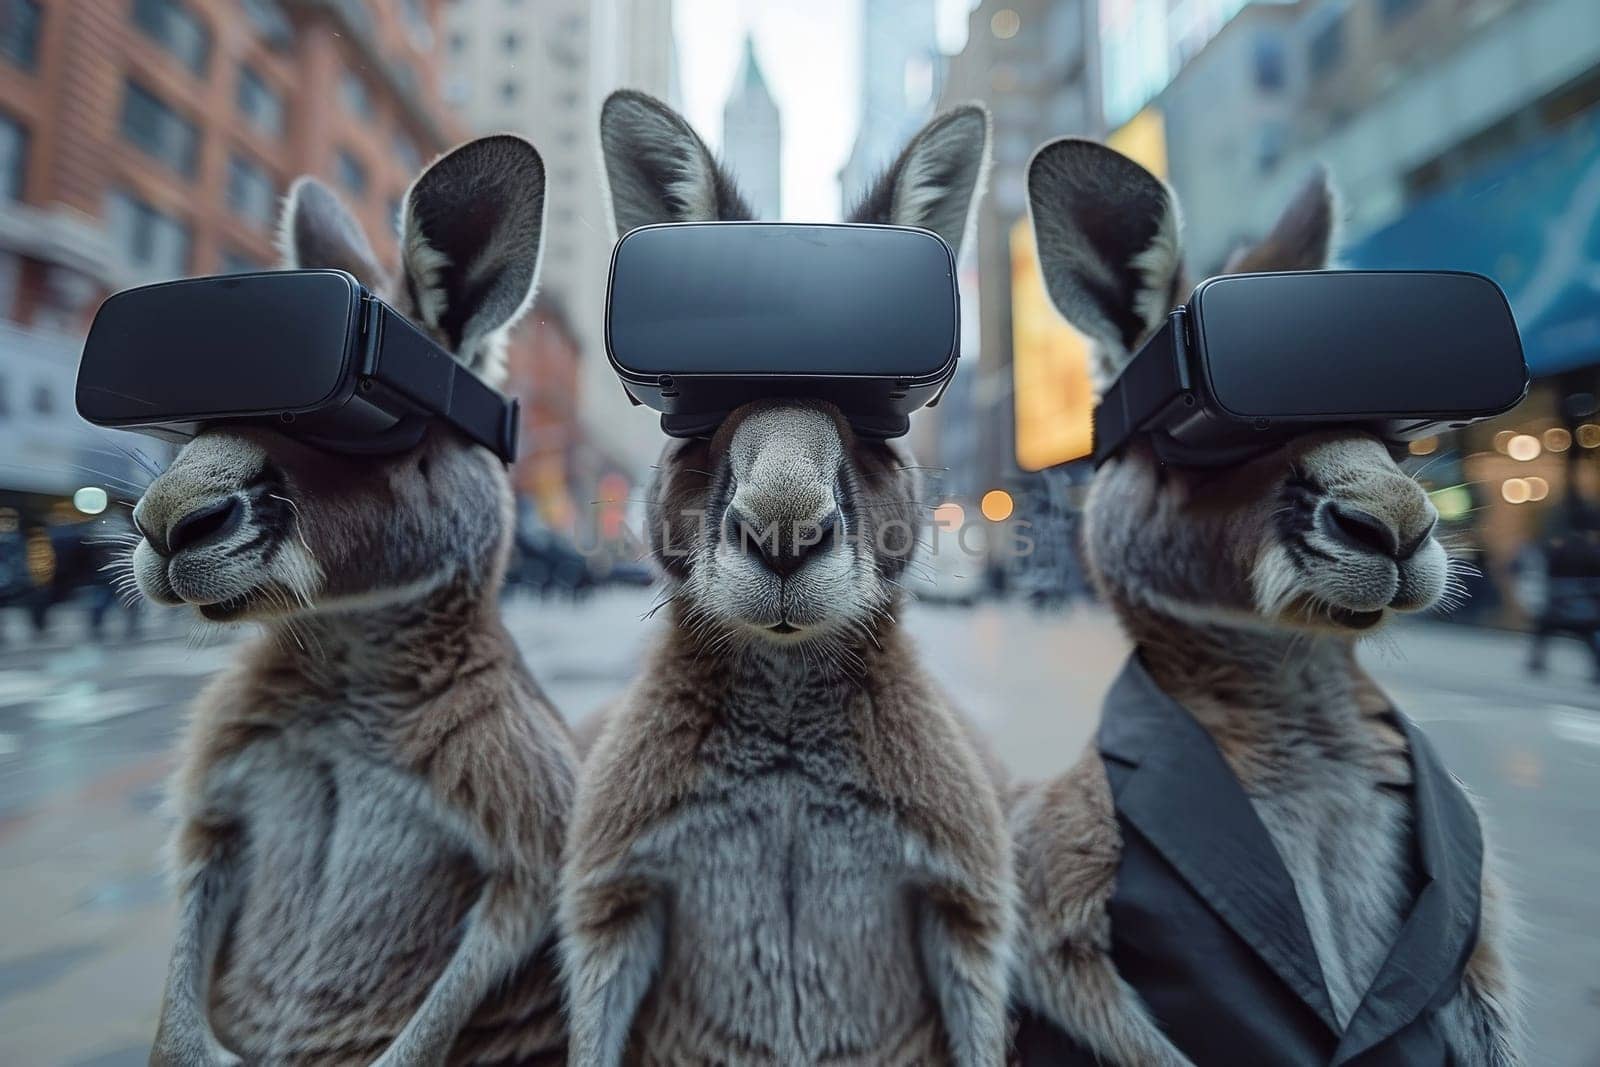 A kangaroo wearing virtual reality goggles. The image has a futuristic and playful mood. The kangaroo's eyes are closed, and it is looking at the camera